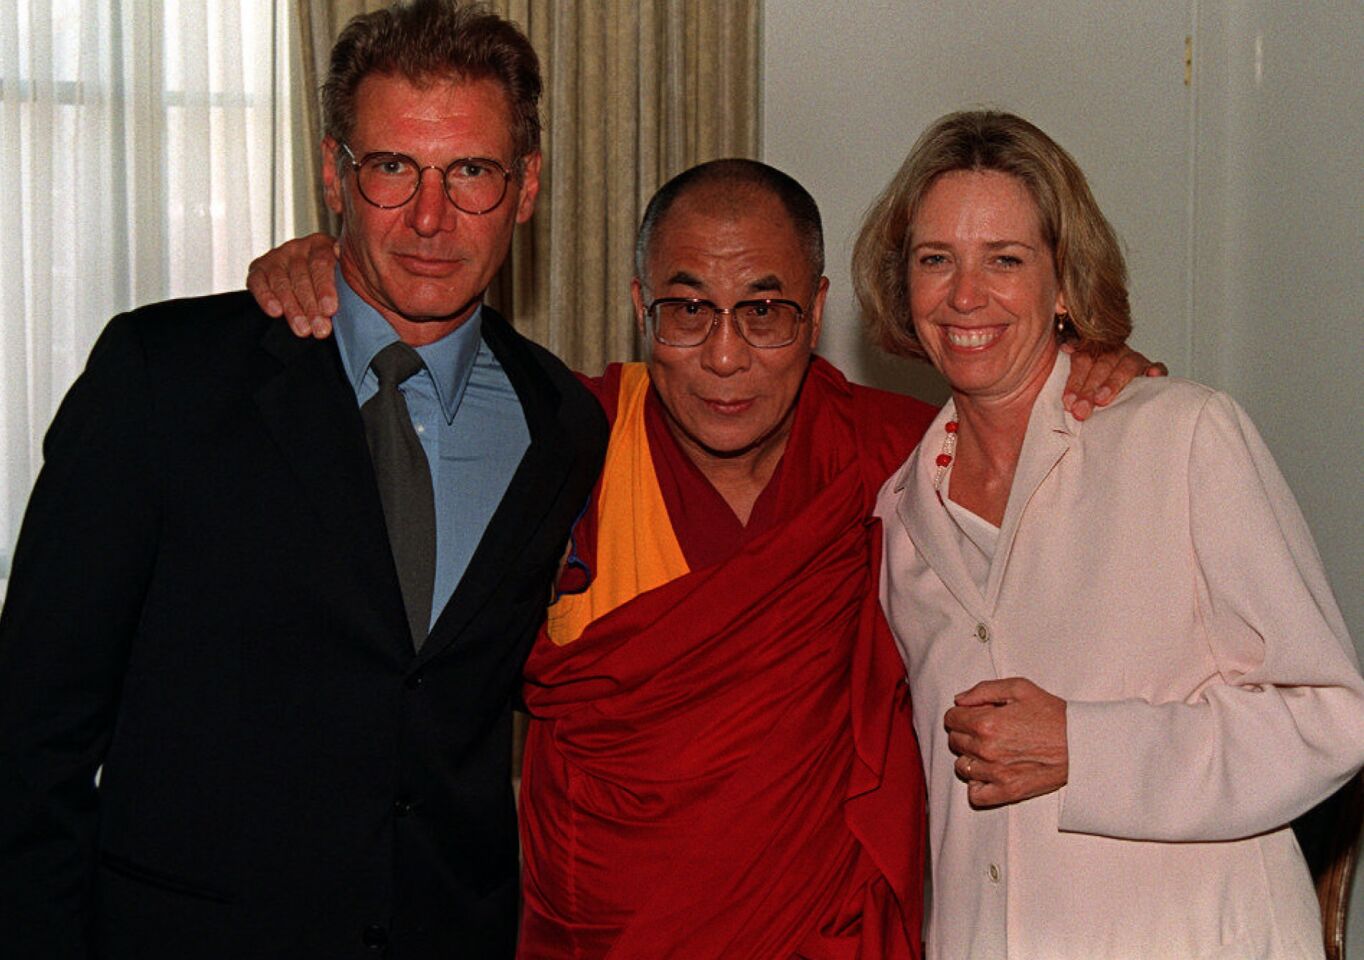 Actor Harrison Ford, left, and then-wife Melissa Mathison pose with the Dalai Lama of Tibet during a star–studded dinner in Beverly Hills in August 1996.